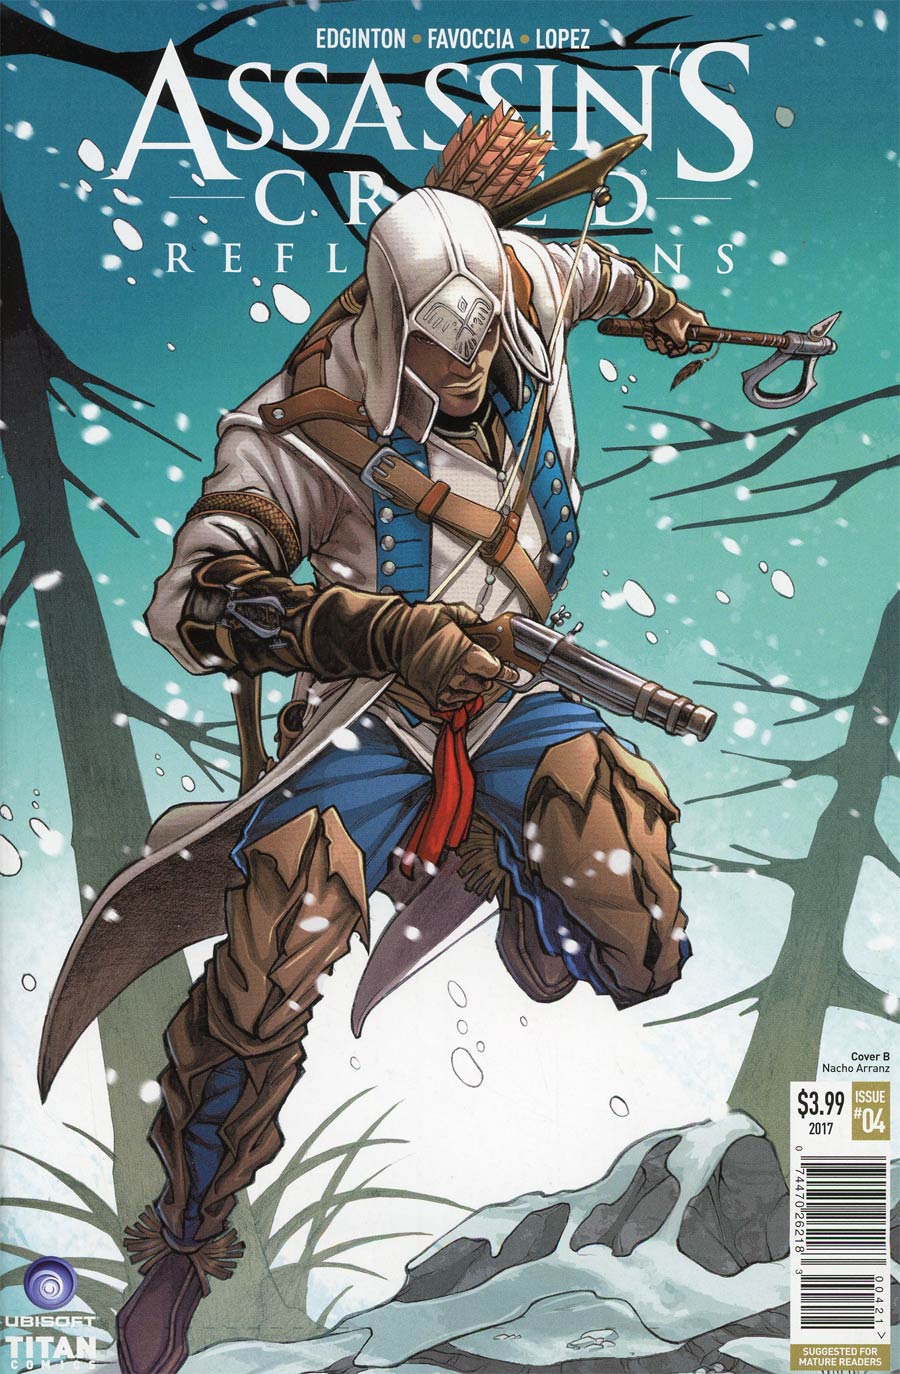 Assassins Creed Reflections #4 Cover B Variant Sunsetagain Cover